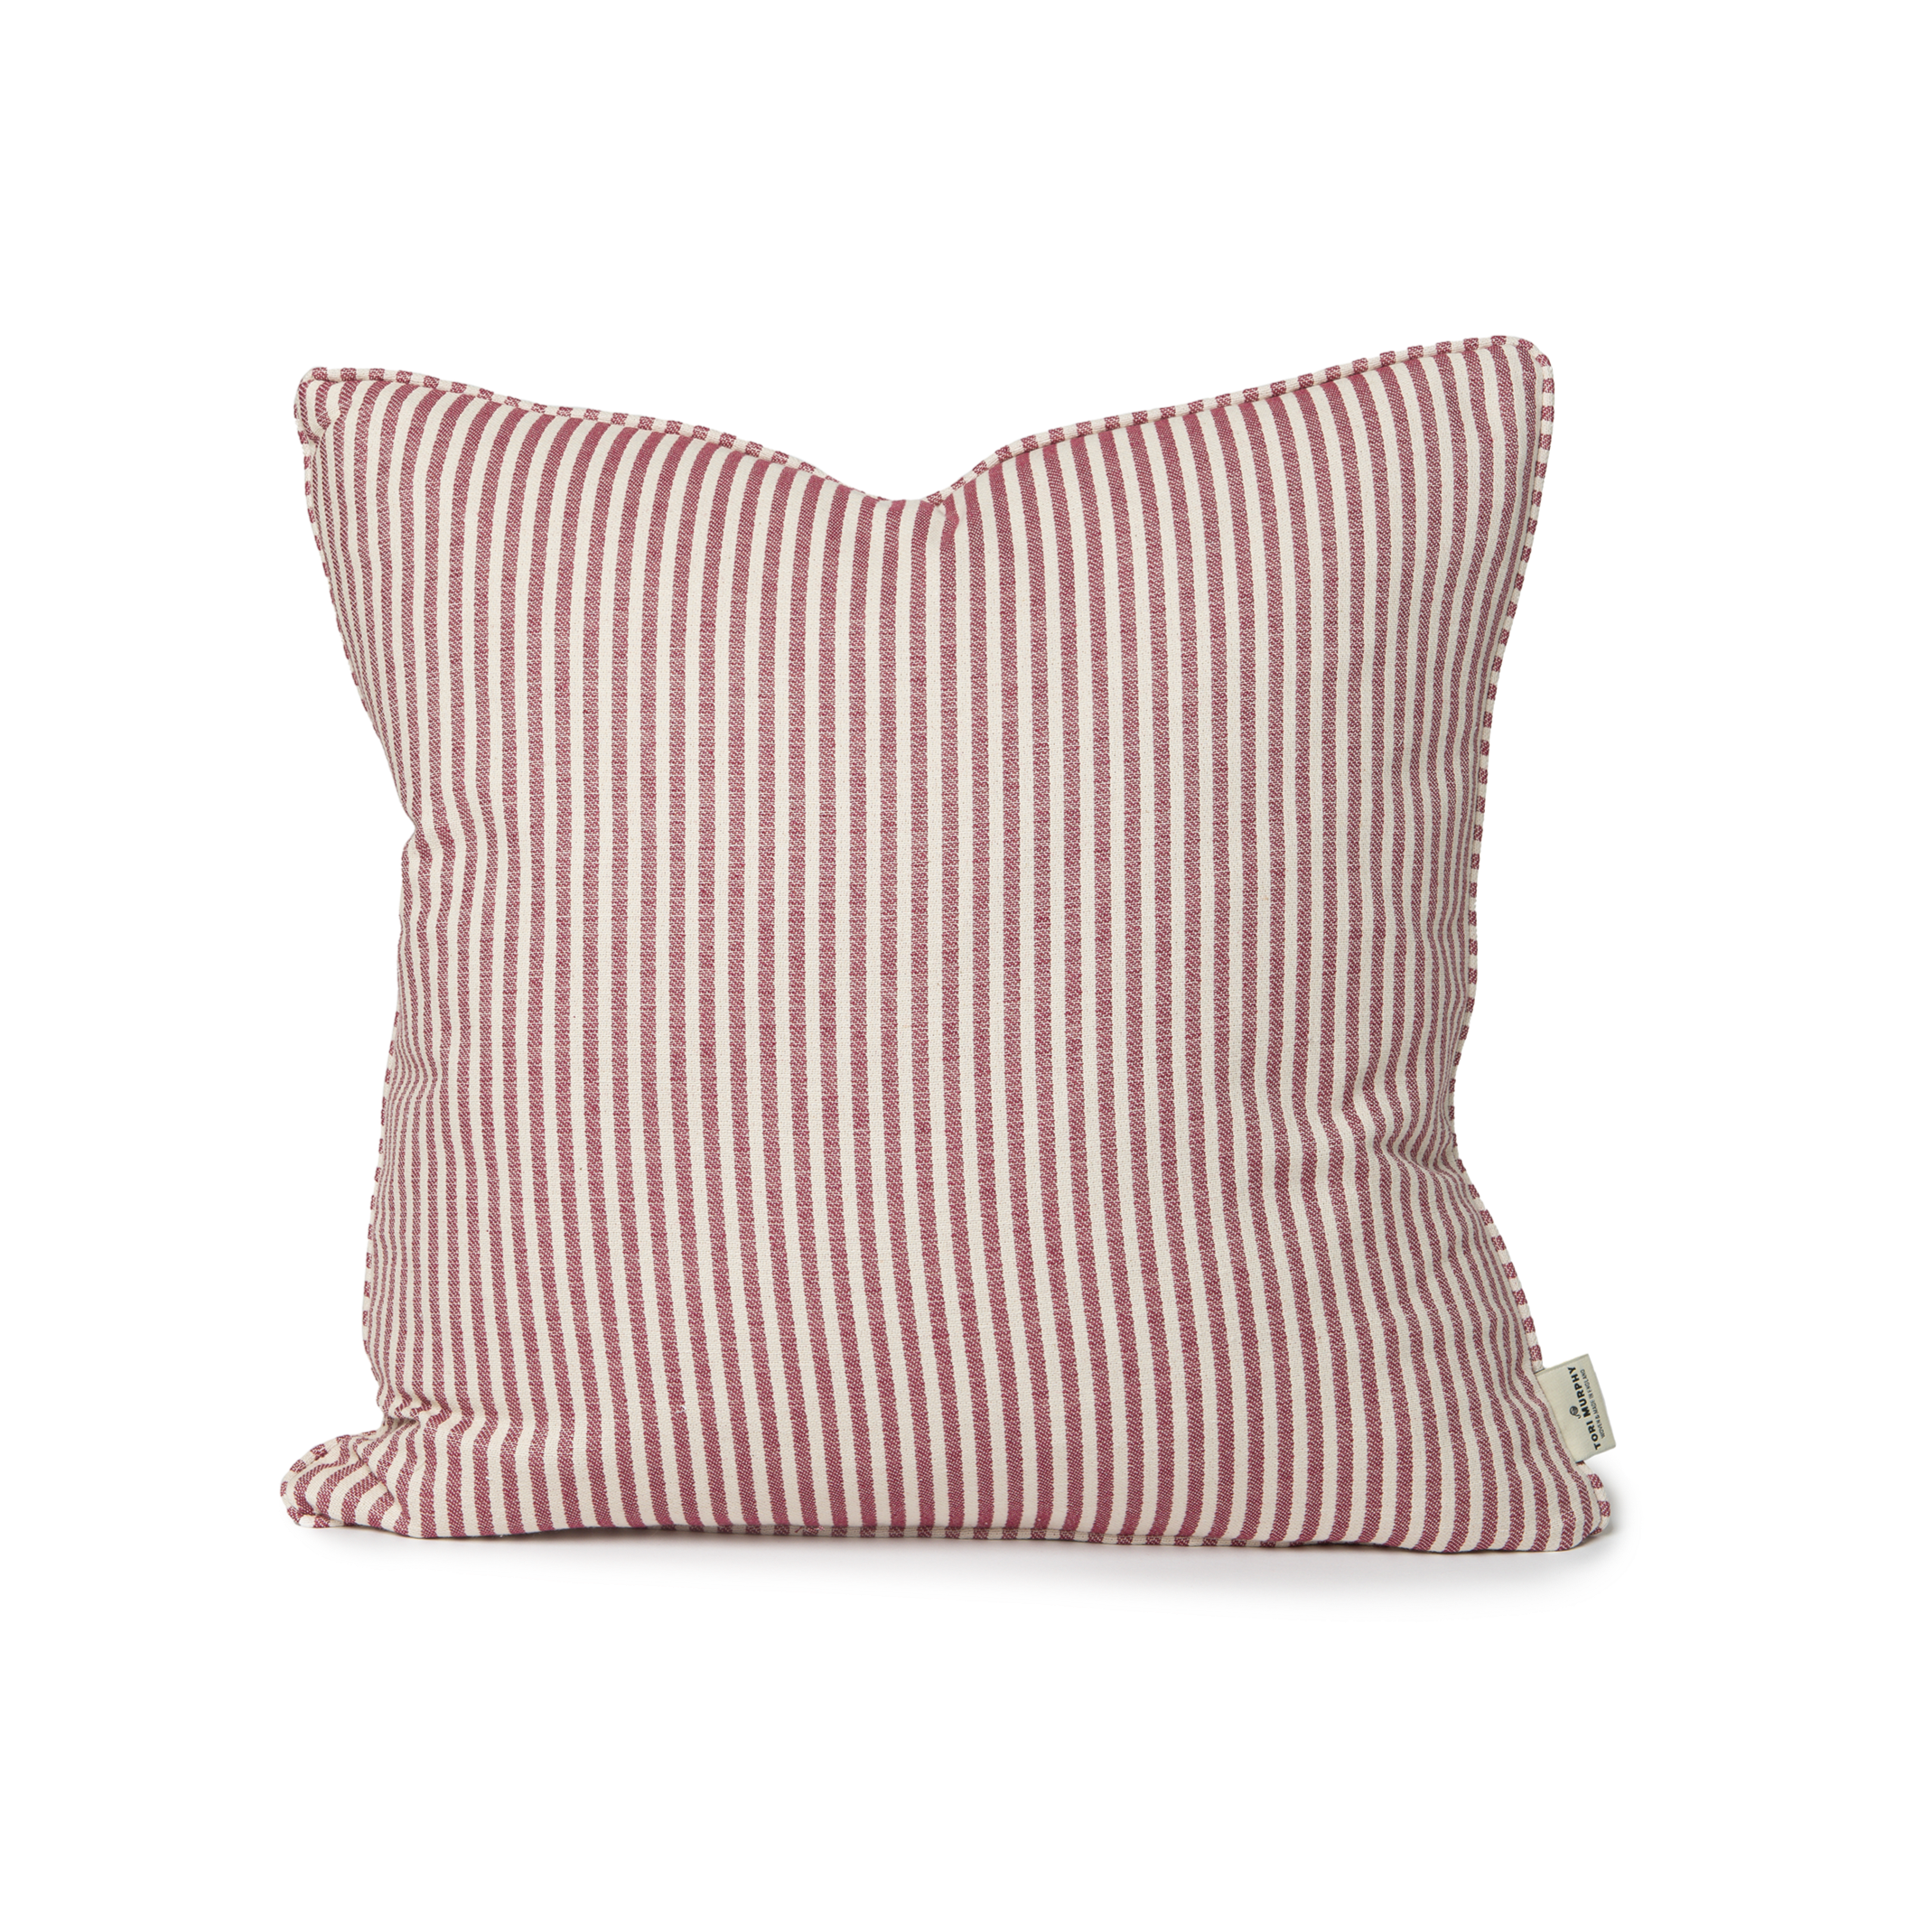 Harbour Stripe Piped Cushion Claret